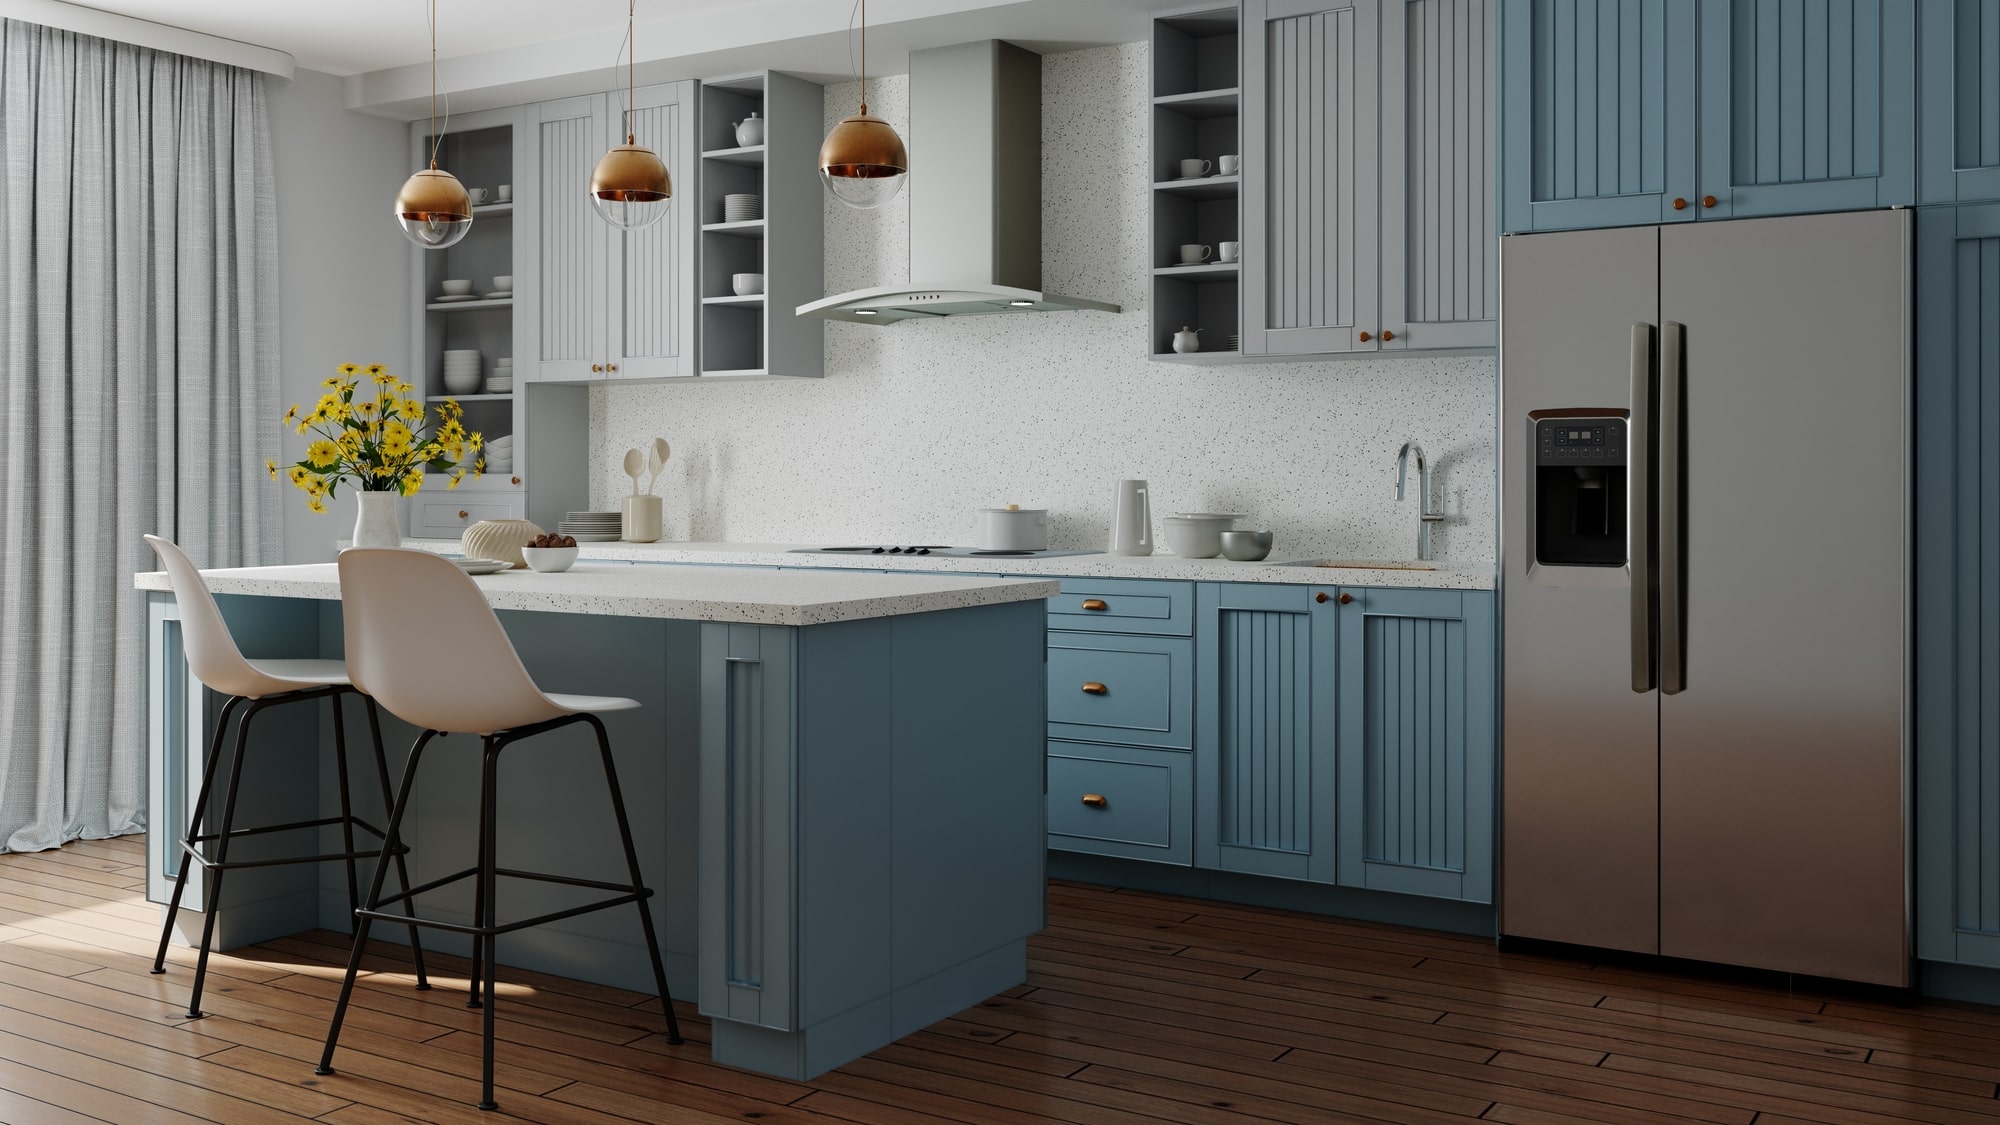 10 Unique Ideas To Customize Your Blue Kitchen Cabinets